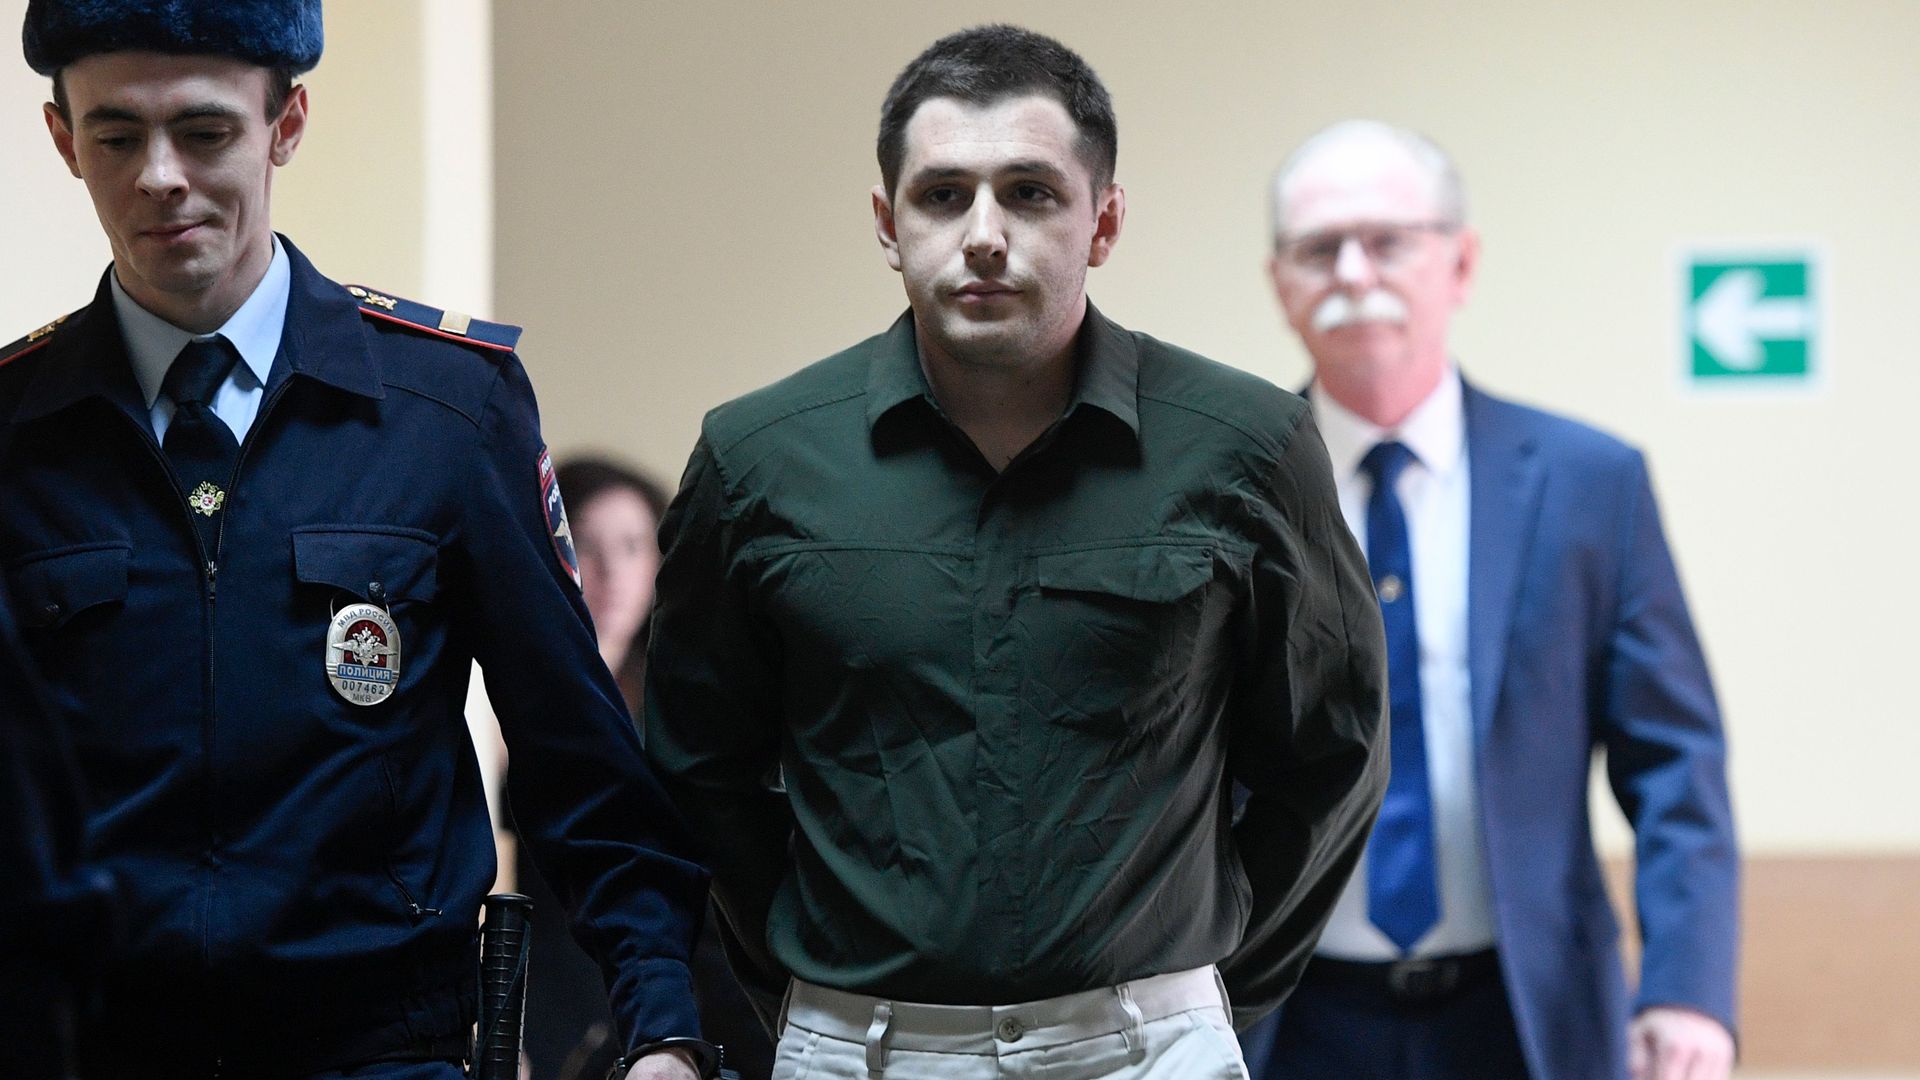 revor Reed, charged with attacking police, into a courtroom prior to a hearing in Moscow on March 11, 2020